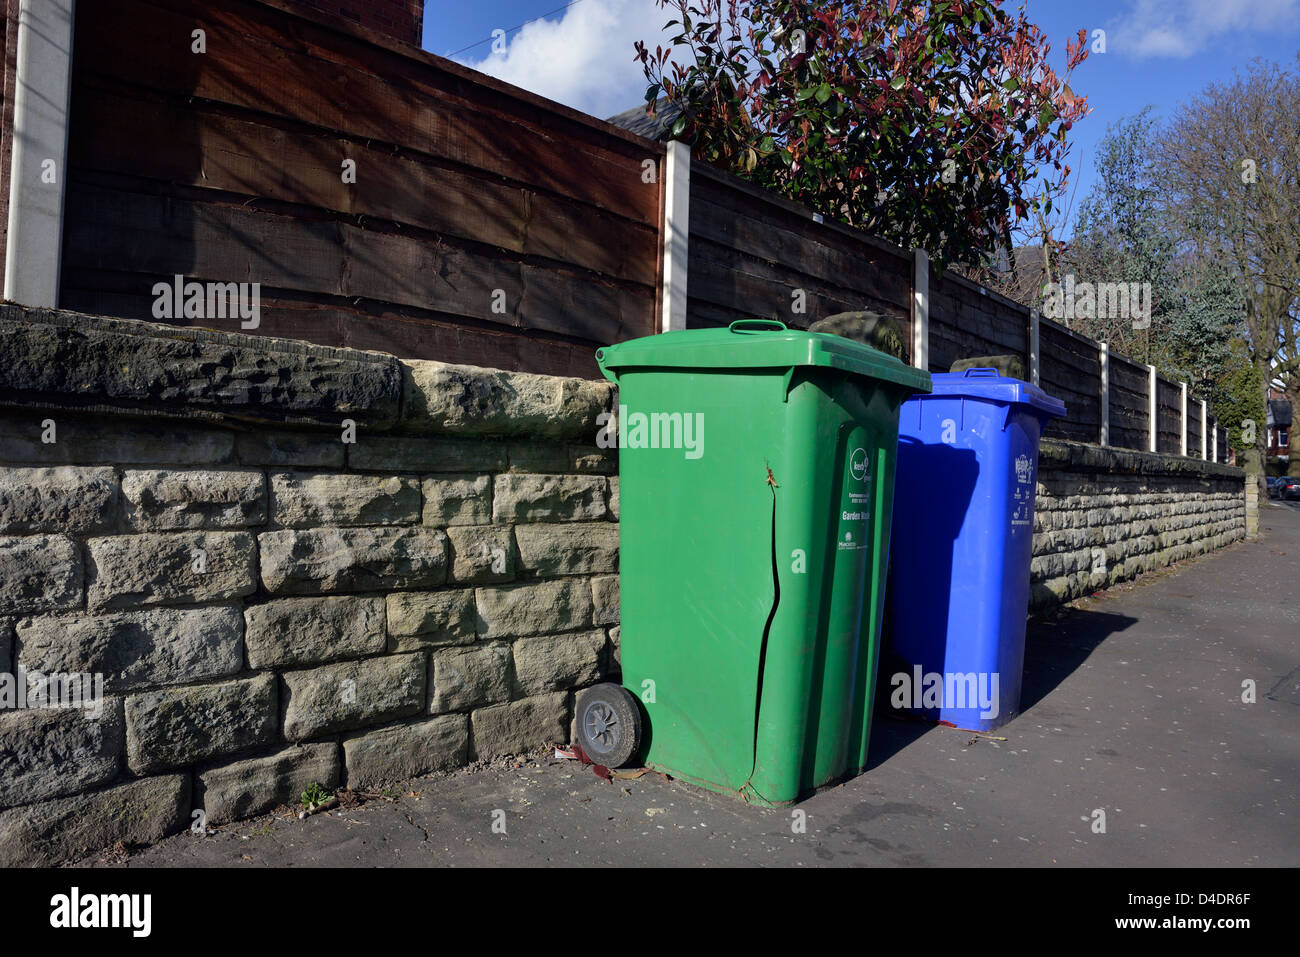 a cracked green wheely bin and a blue wheely bin left on the pavement days after the bins have been emptied Stock Photo